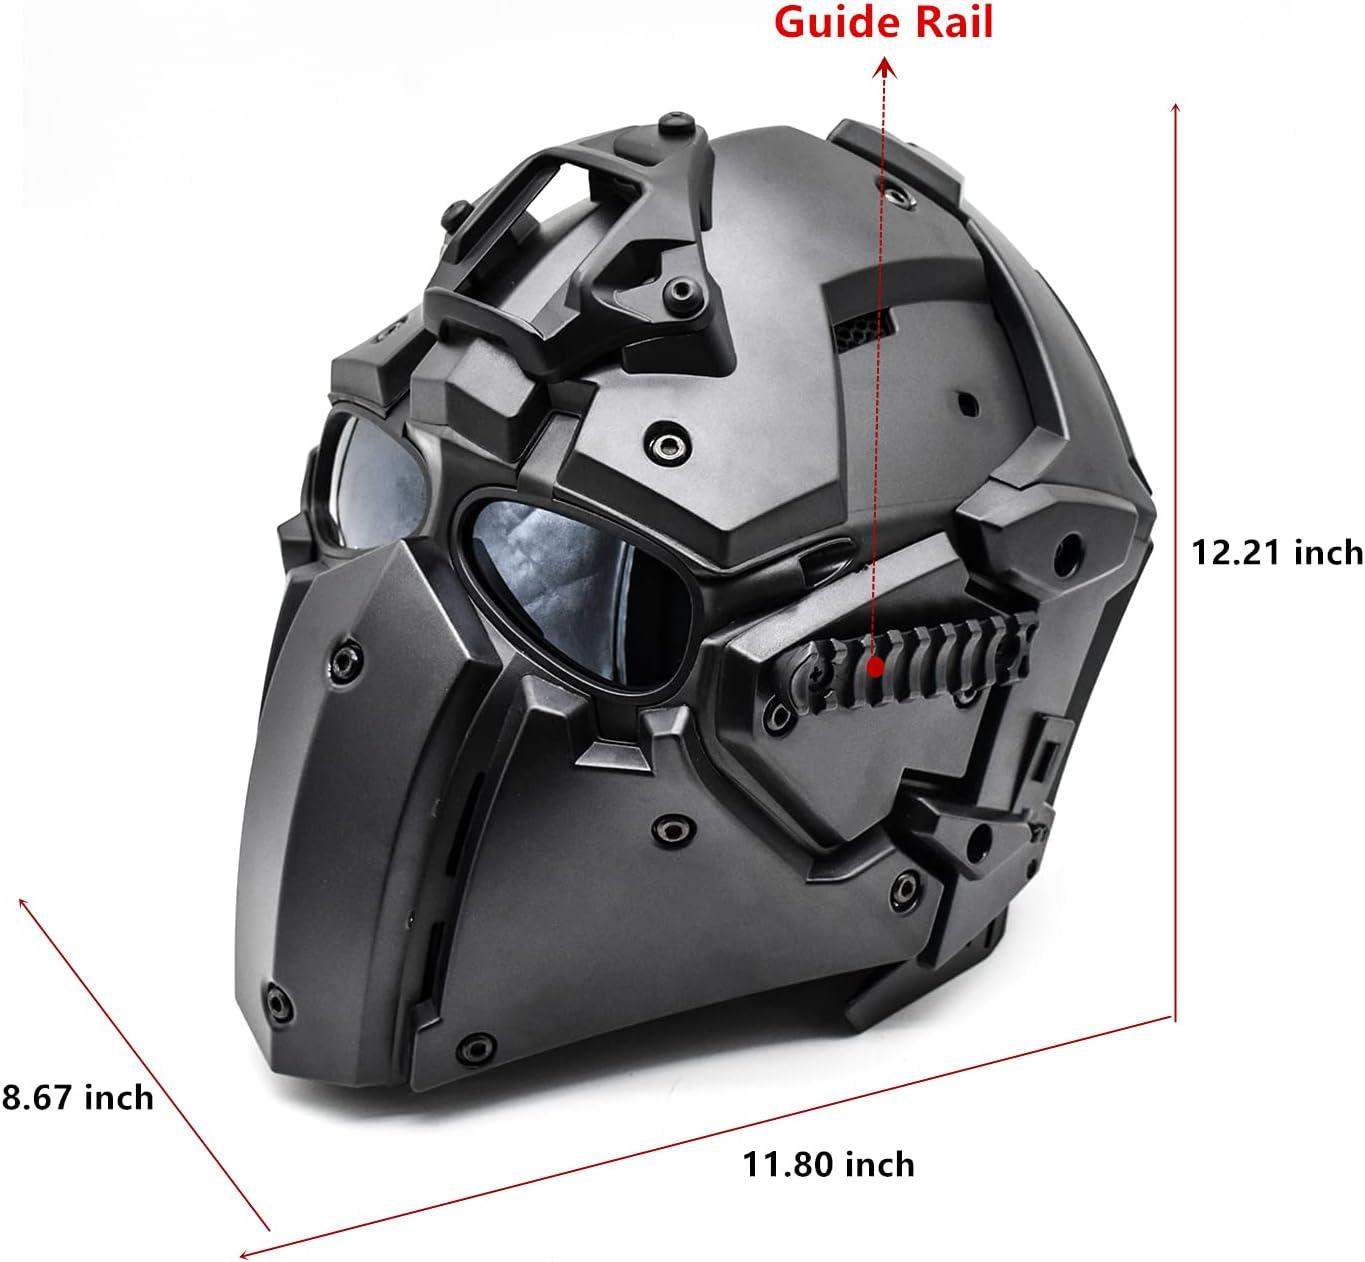 Tactical Airsoft Helmet with Full Face Protective Mask kit for Hunting  Cosplay